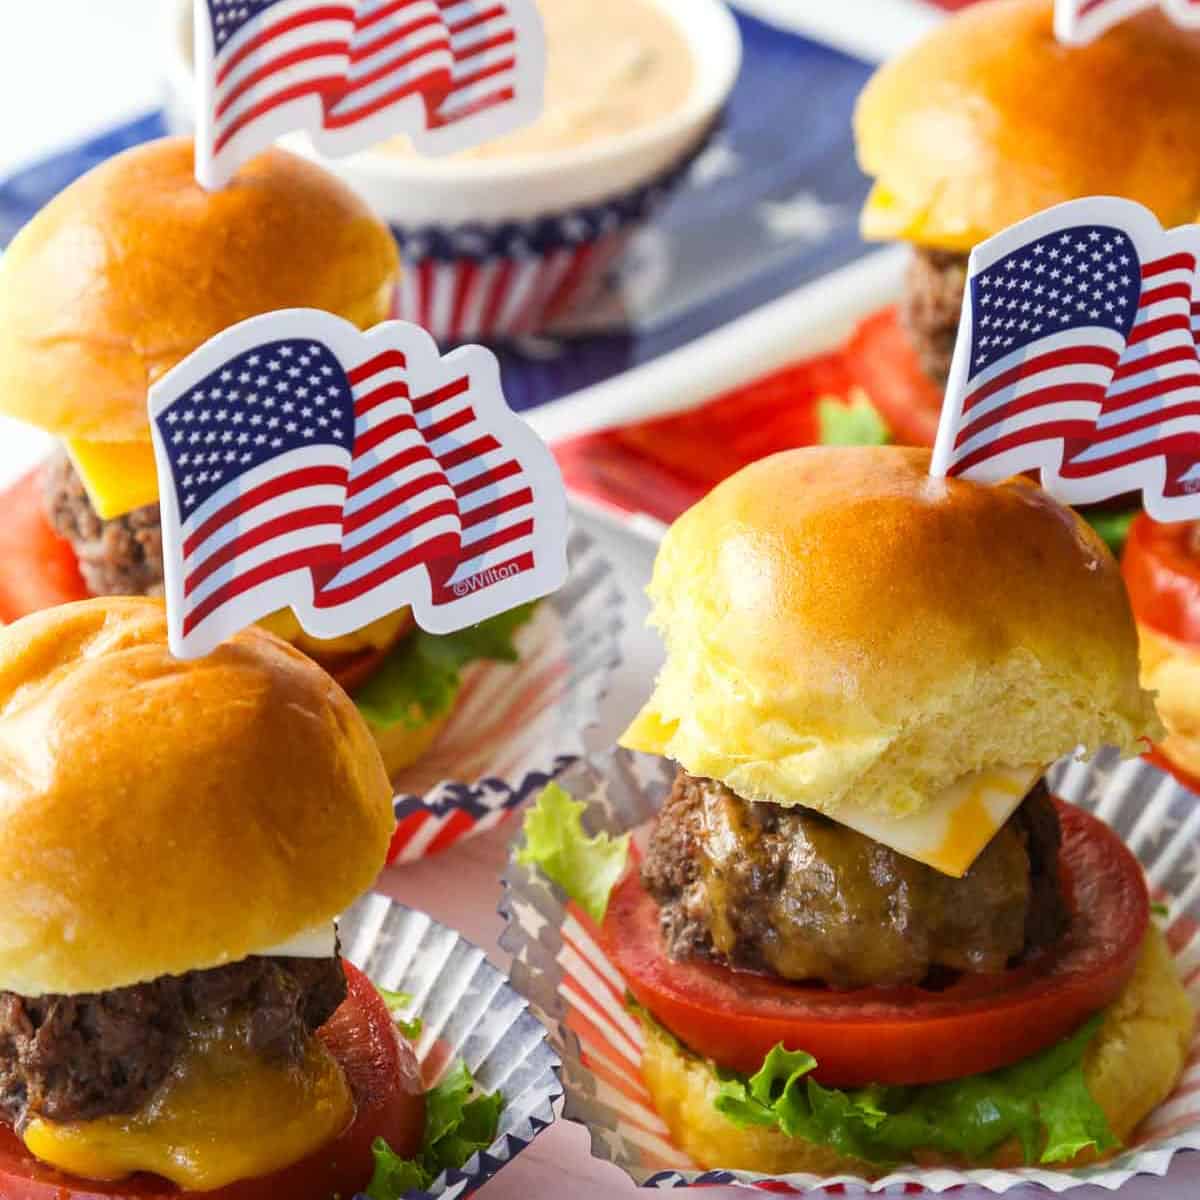 Mini cheeseburgers with melted cheese, tomato, and lettuce with American flag toothpick decoration on top.